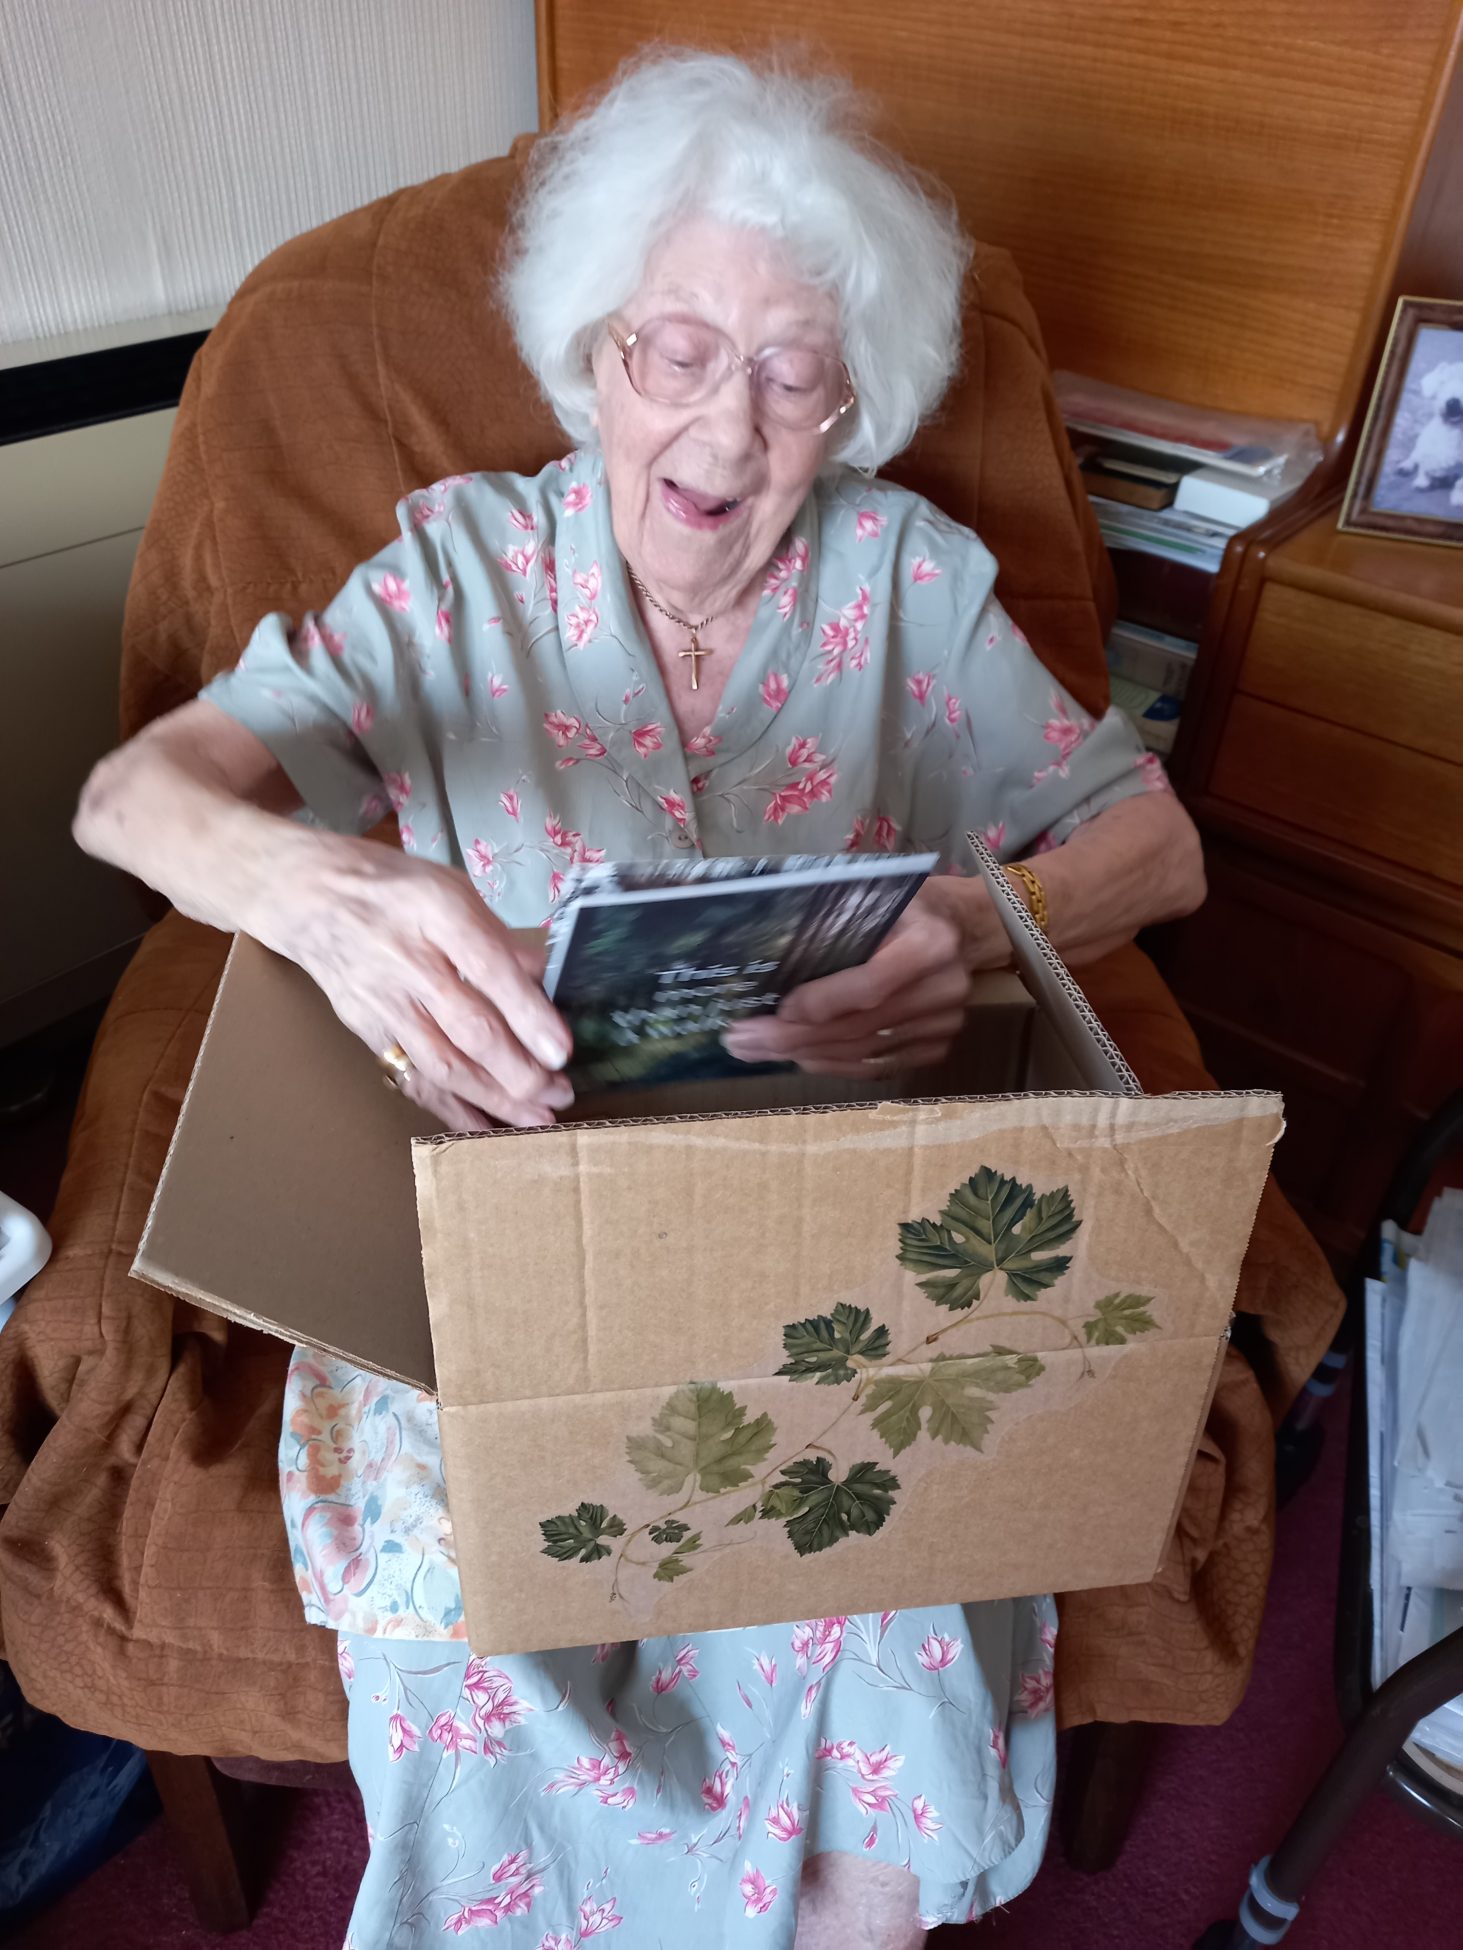 A photo of an older lady with white hair receiving and opening one of the forest bathing boxes. She is looking at the contents of the box and smiling.